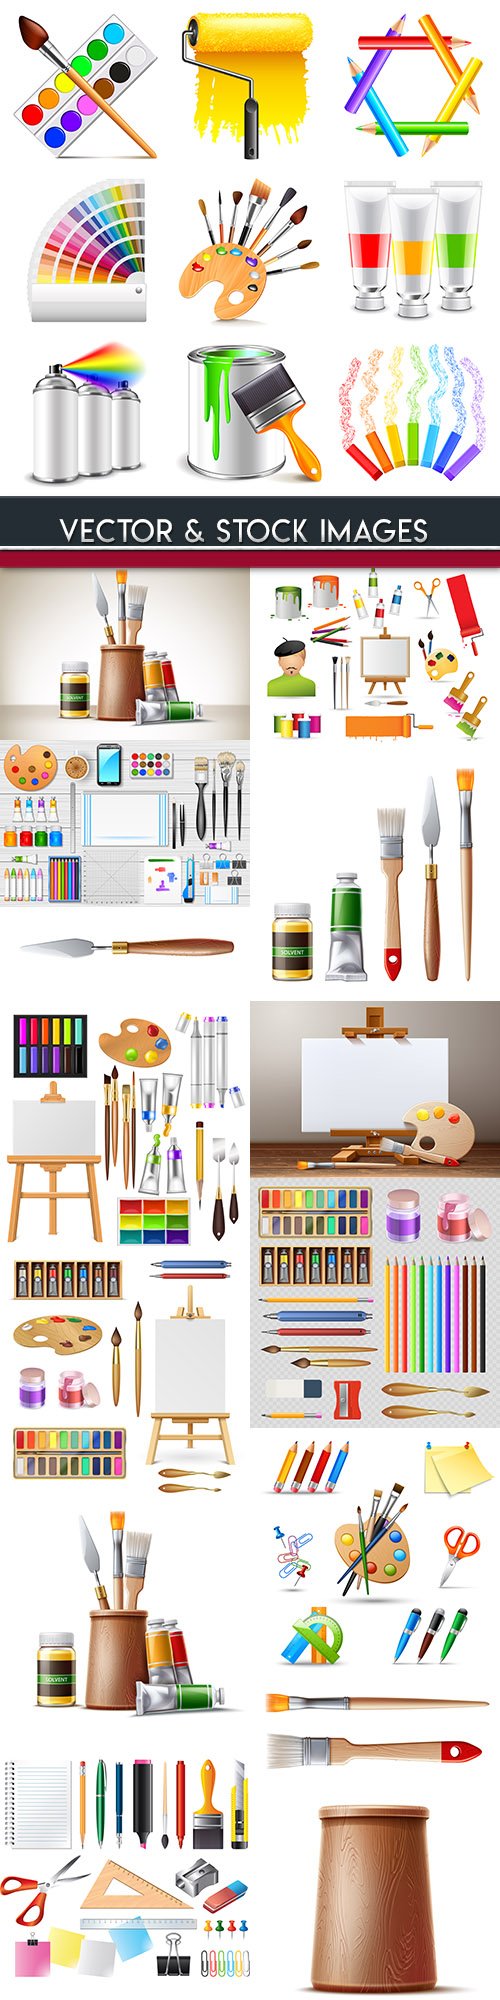 Paints and brushes for drawing young artist